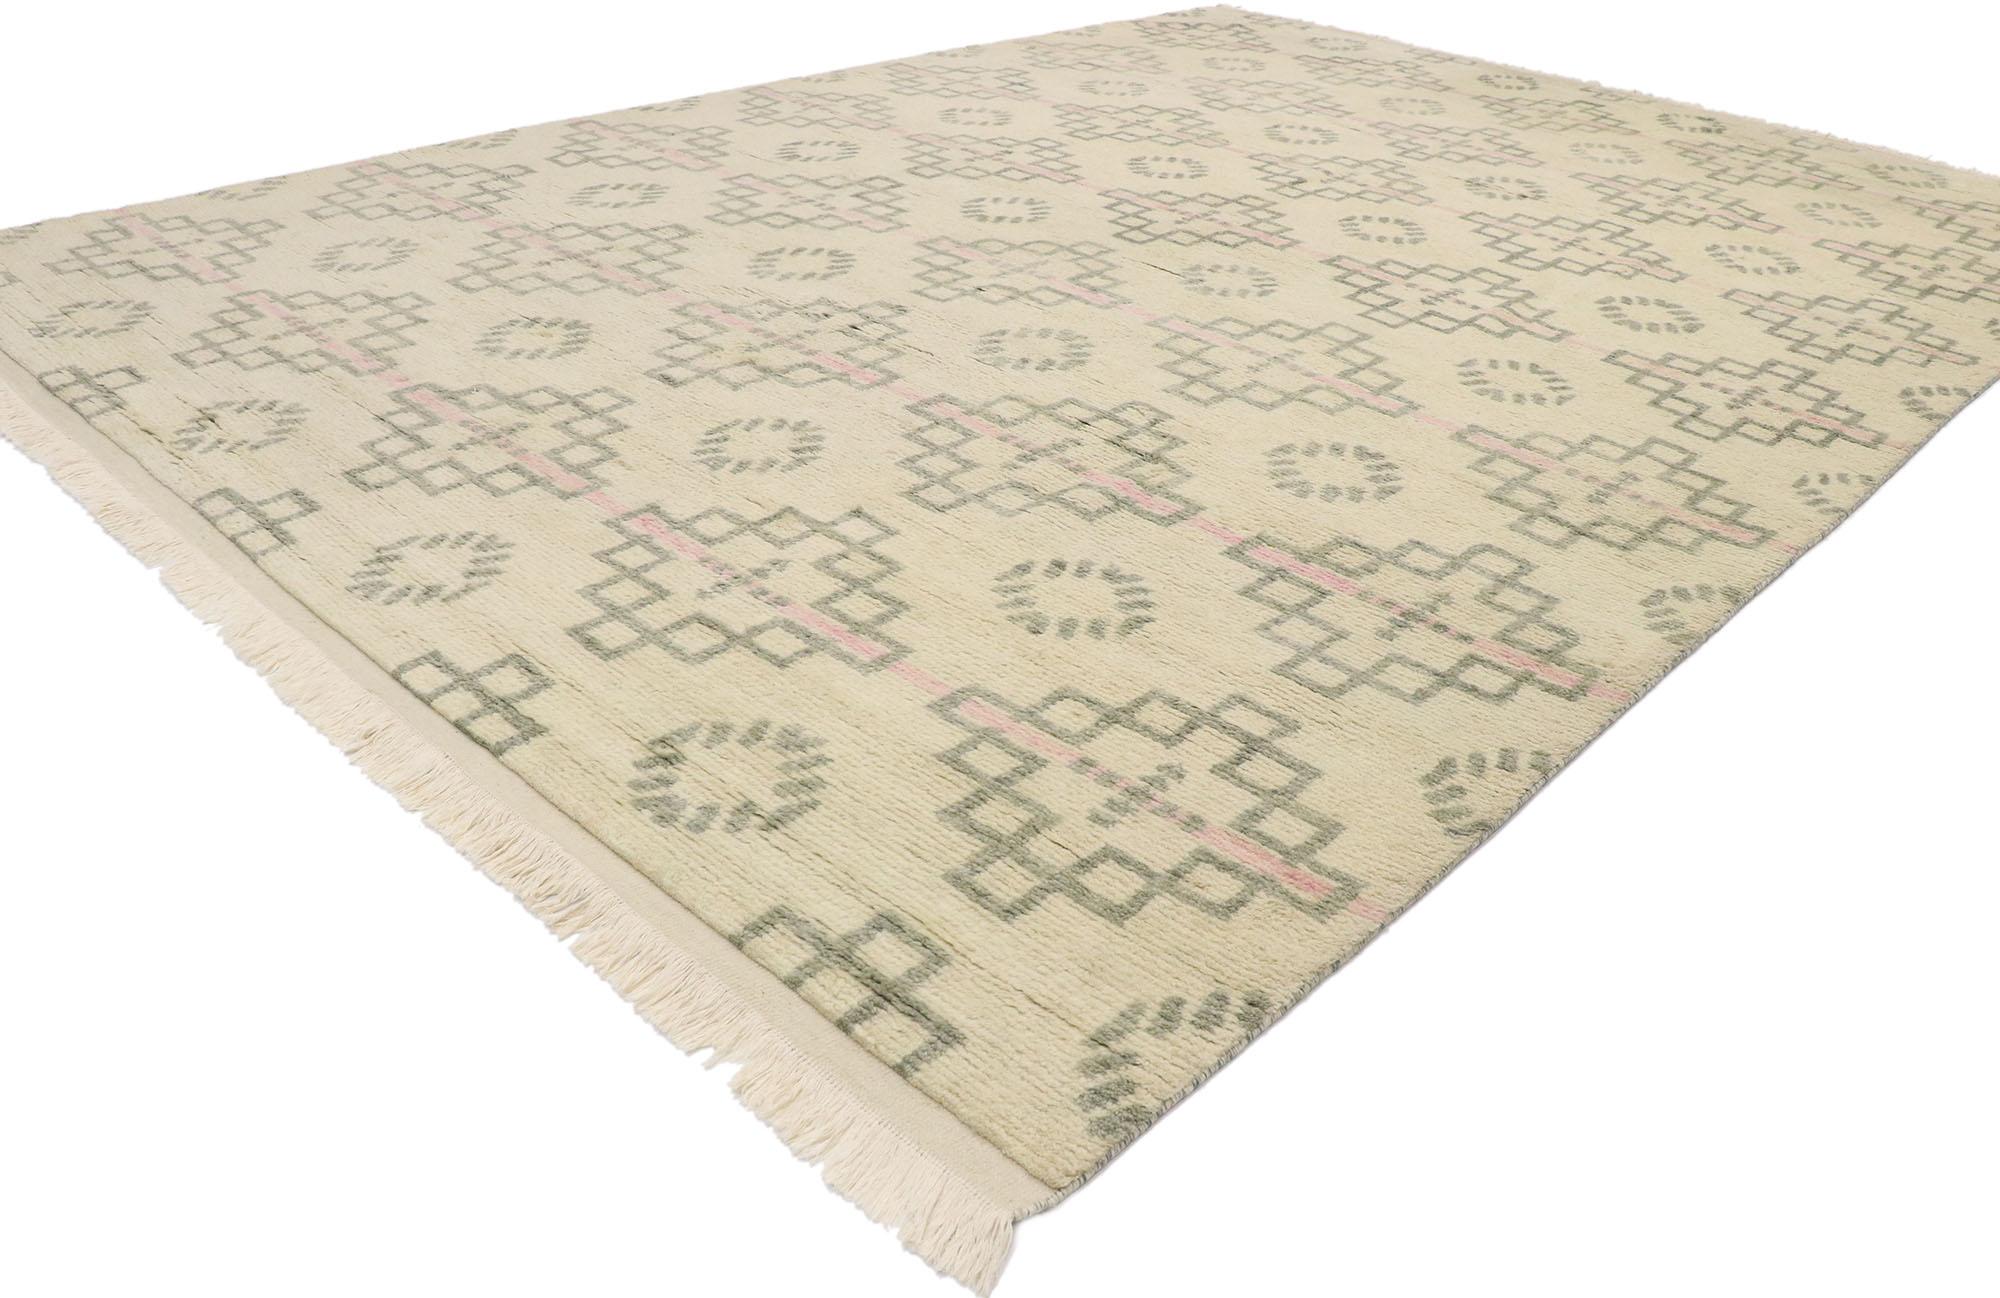 30548, new contemporary Moroccan style rug with Postmodern Cubist style. This hand knotted wool contemporary Moroccan style rug features an all-over pattern of offset rows of stepped diamond shaped medallions and rosettes spread across a vanilla